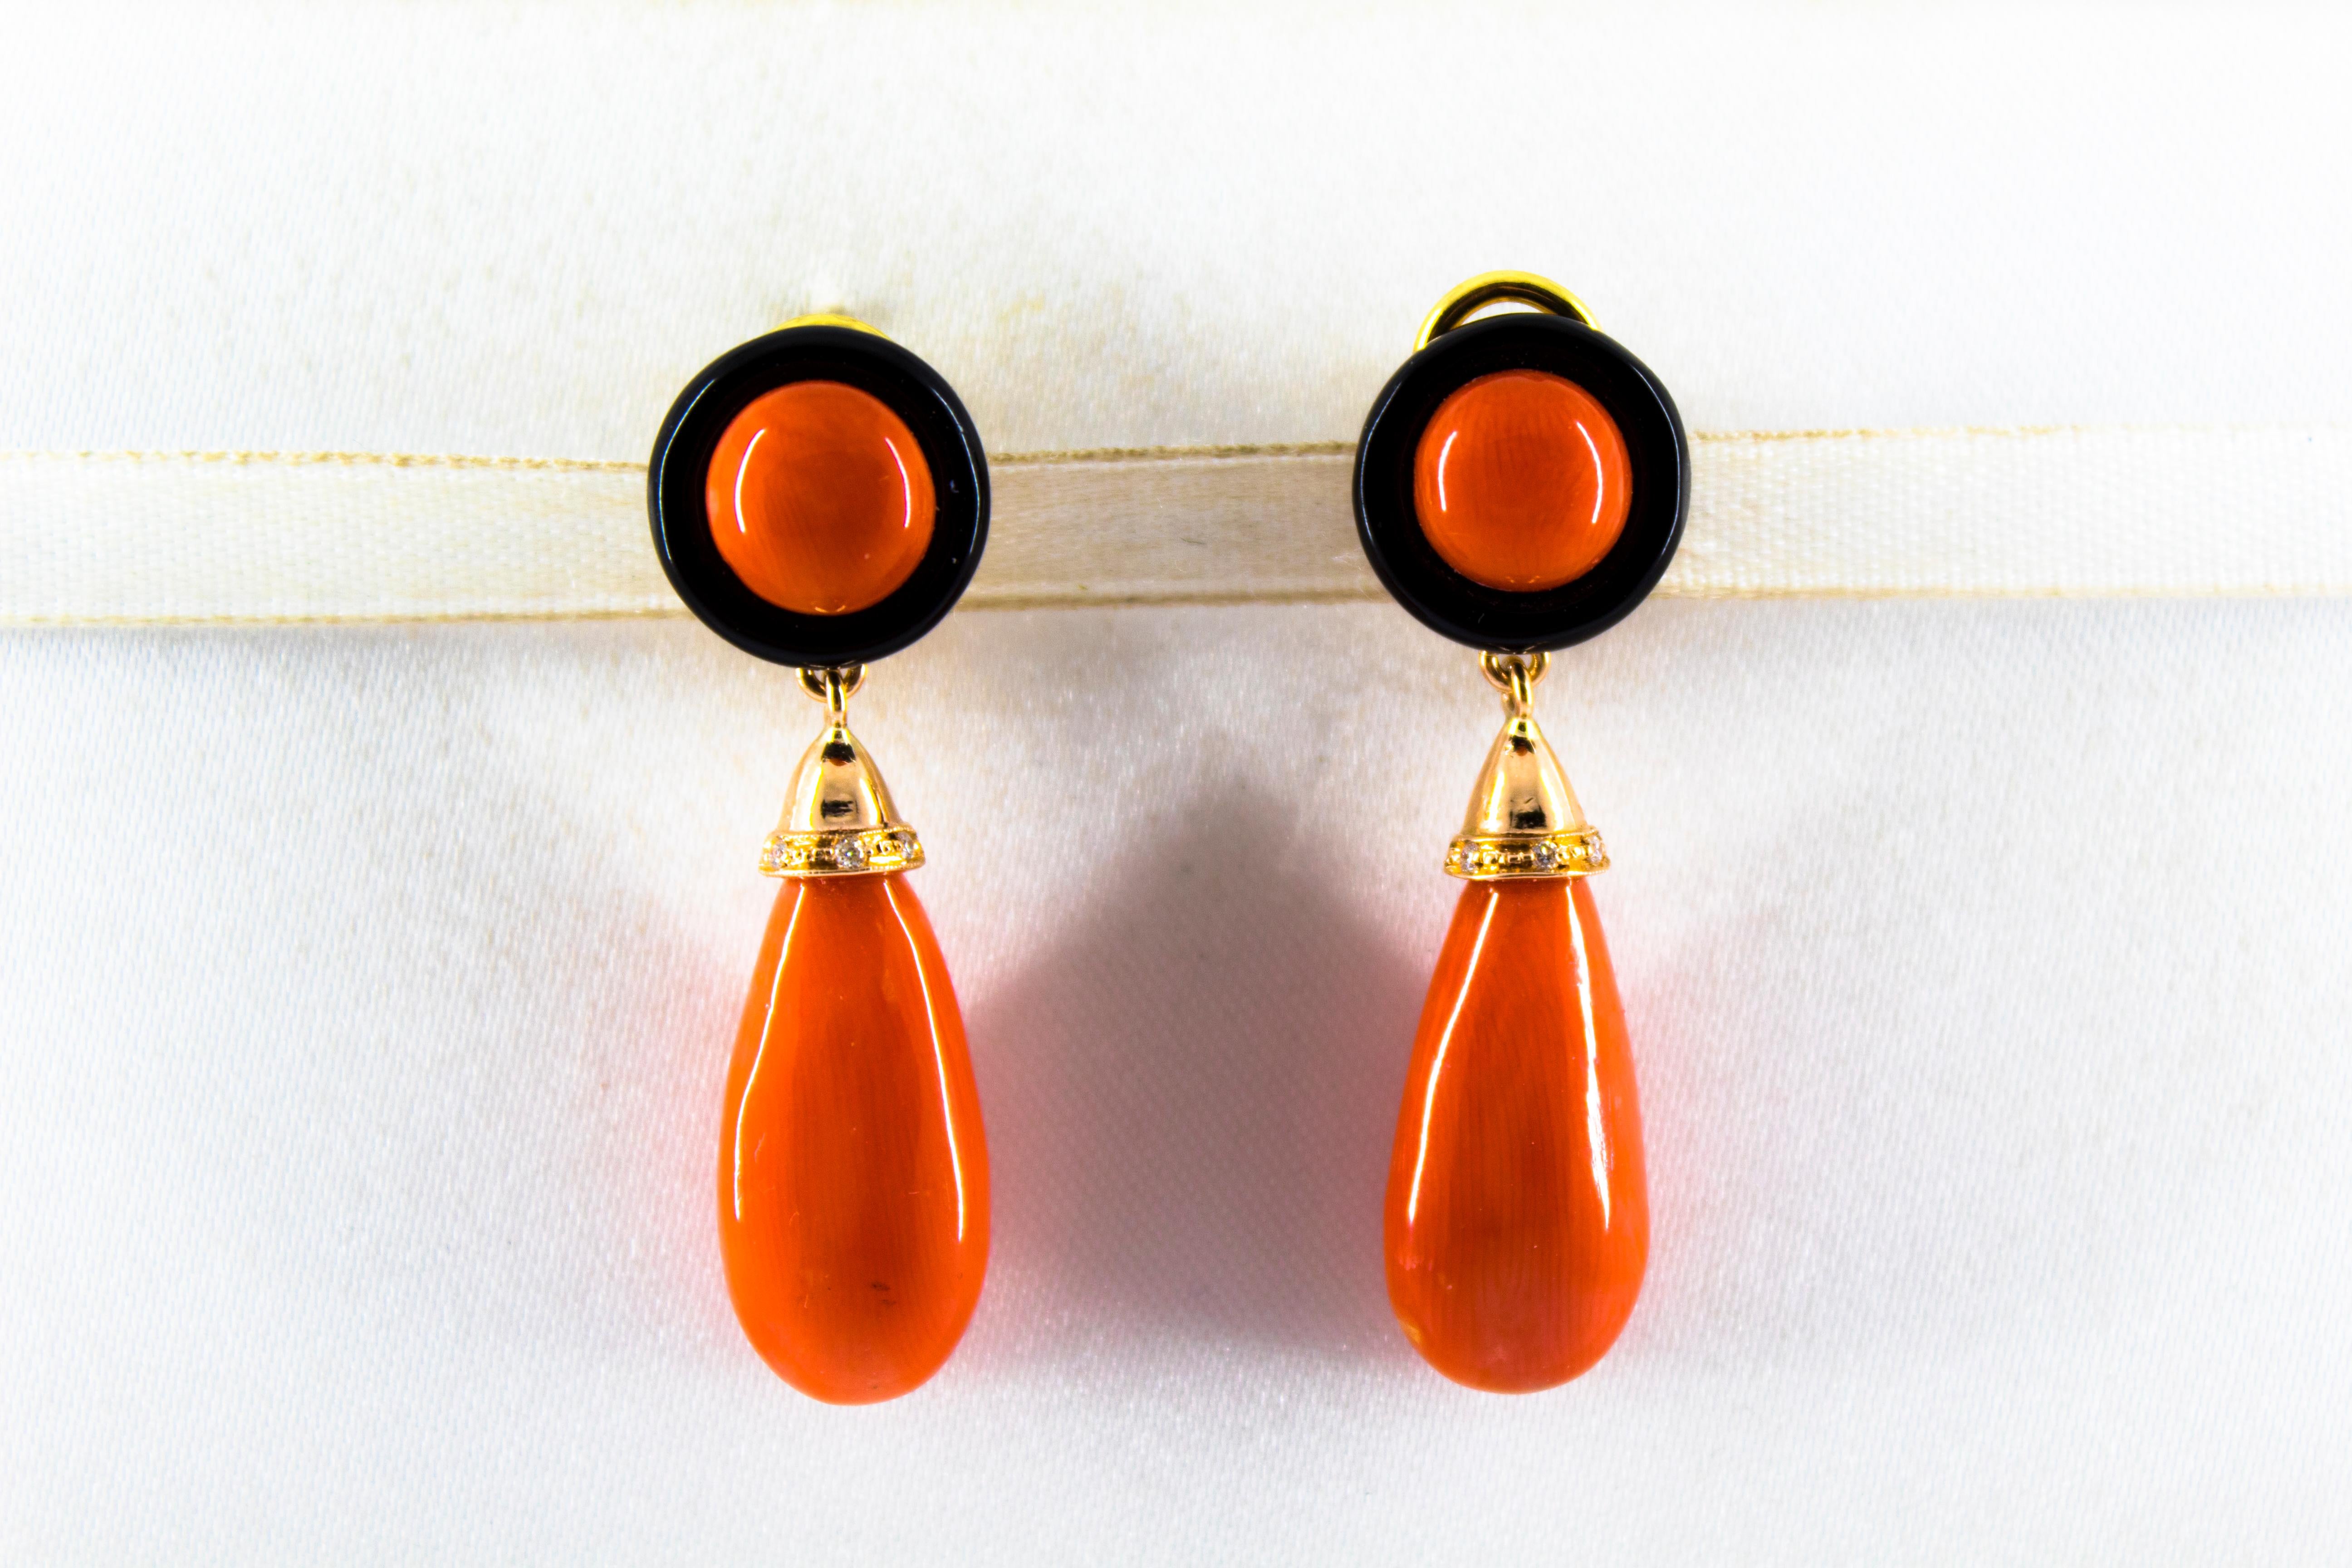 These Clip-On Earrings are made of 14K Yellow Gold with 18K Yellow Gold Clips.
These Earrings have 0.05 Carats of White Diamonds.
These Earrings have Red Mediterranean (Sardinia, Italy) Coral.
These Earrings have also Onyx.
We're a workshop so every